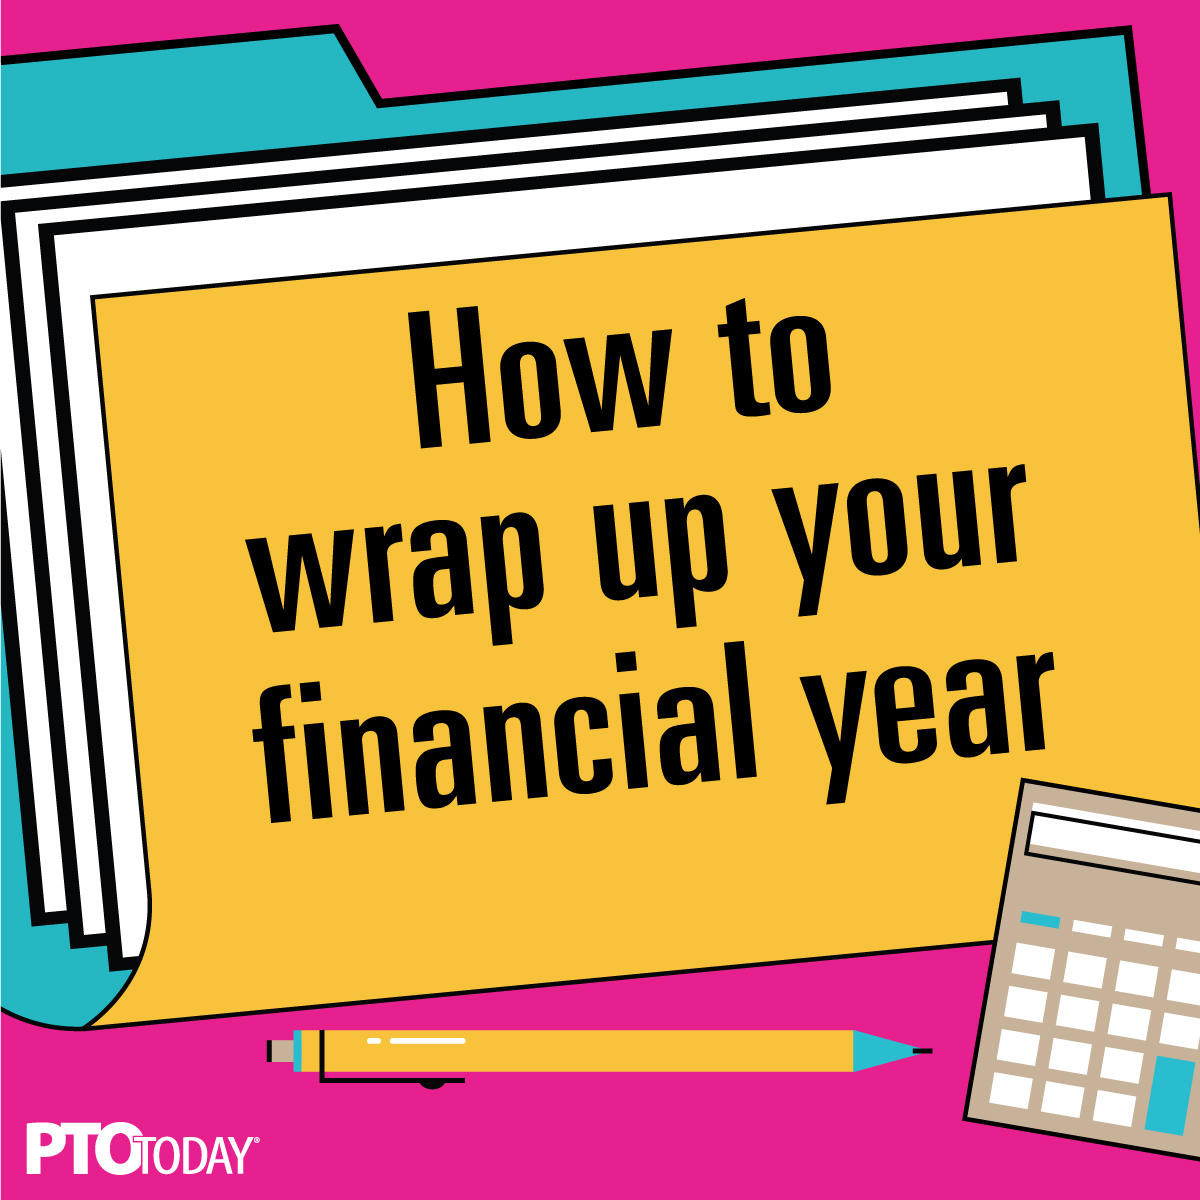 How to close out your finances